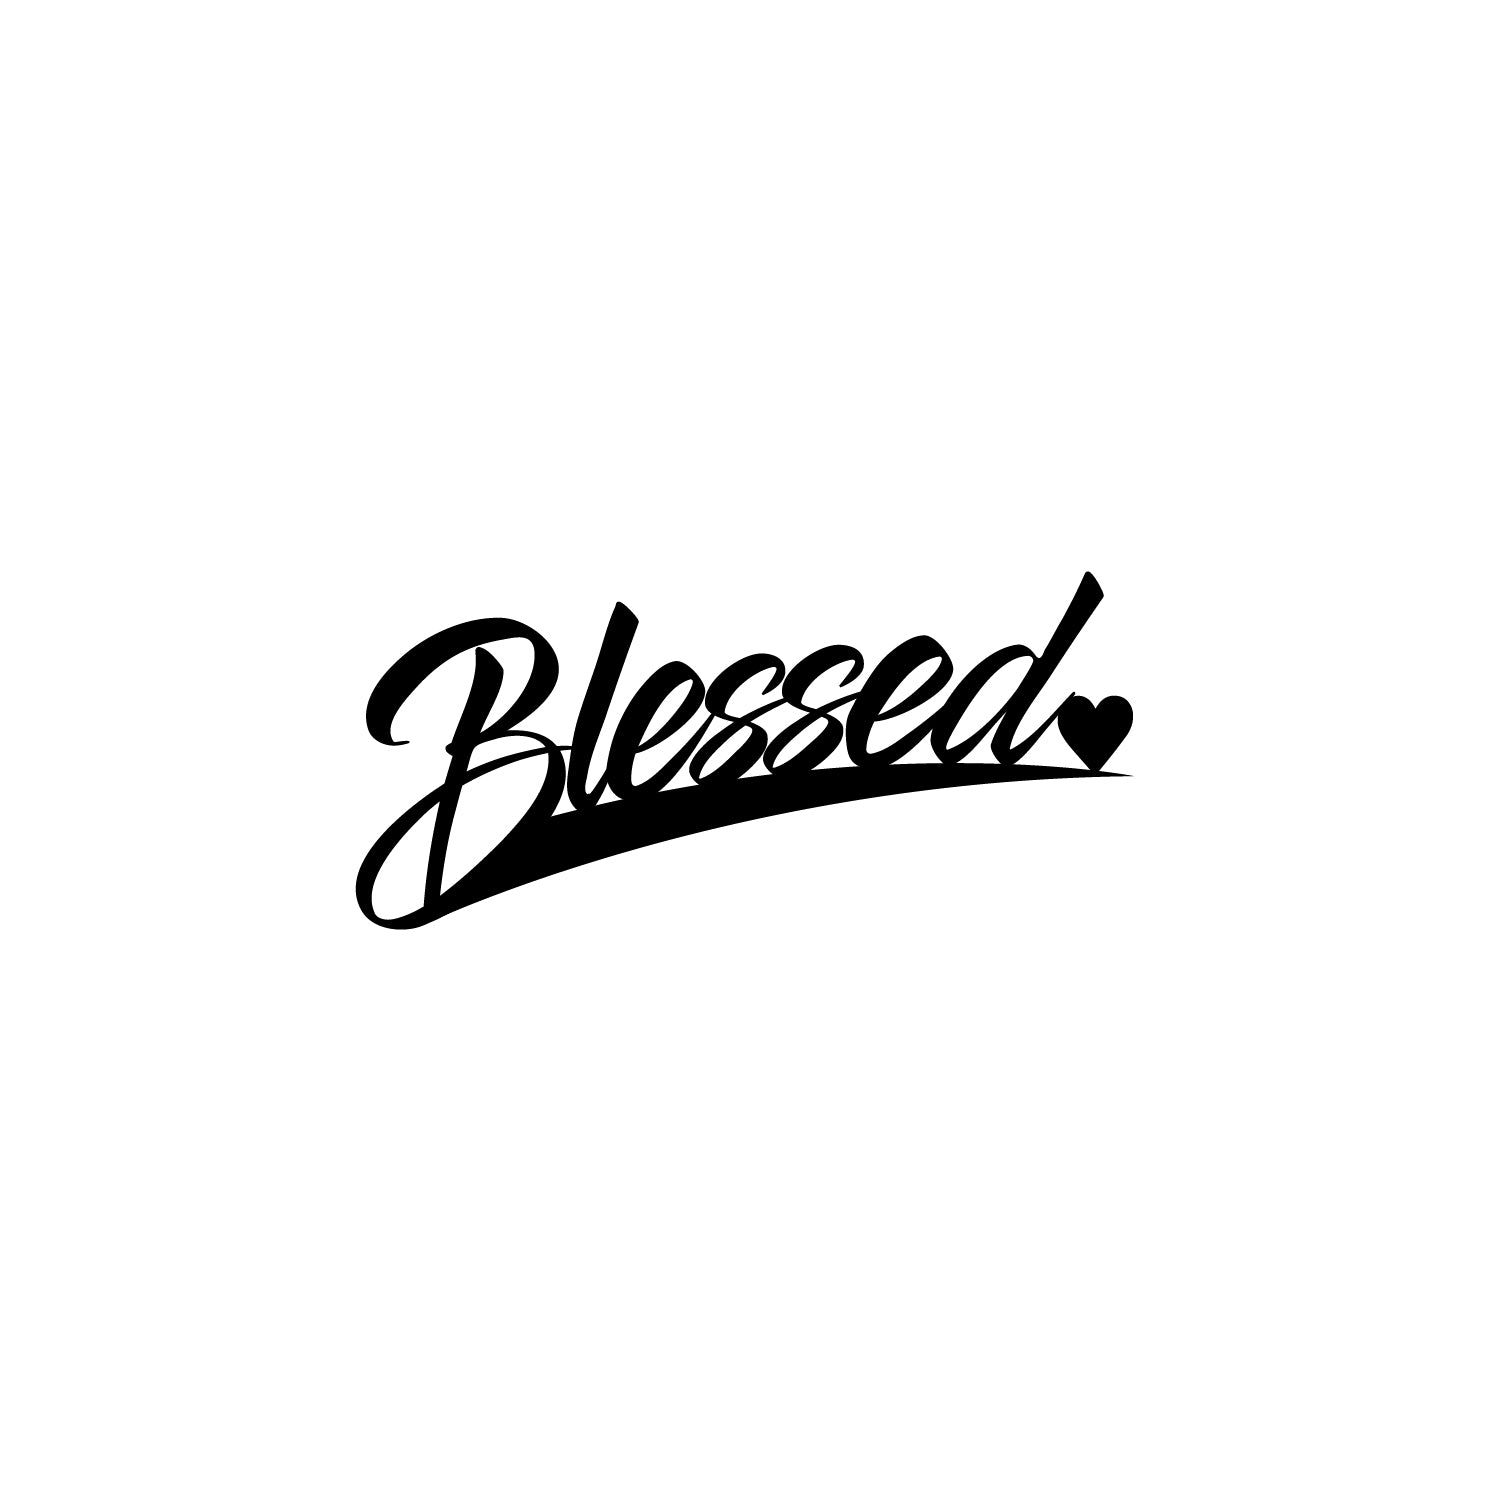 Blessed Black Engineered Wood Wall Art Cutout, Ready To Hang Home Decor